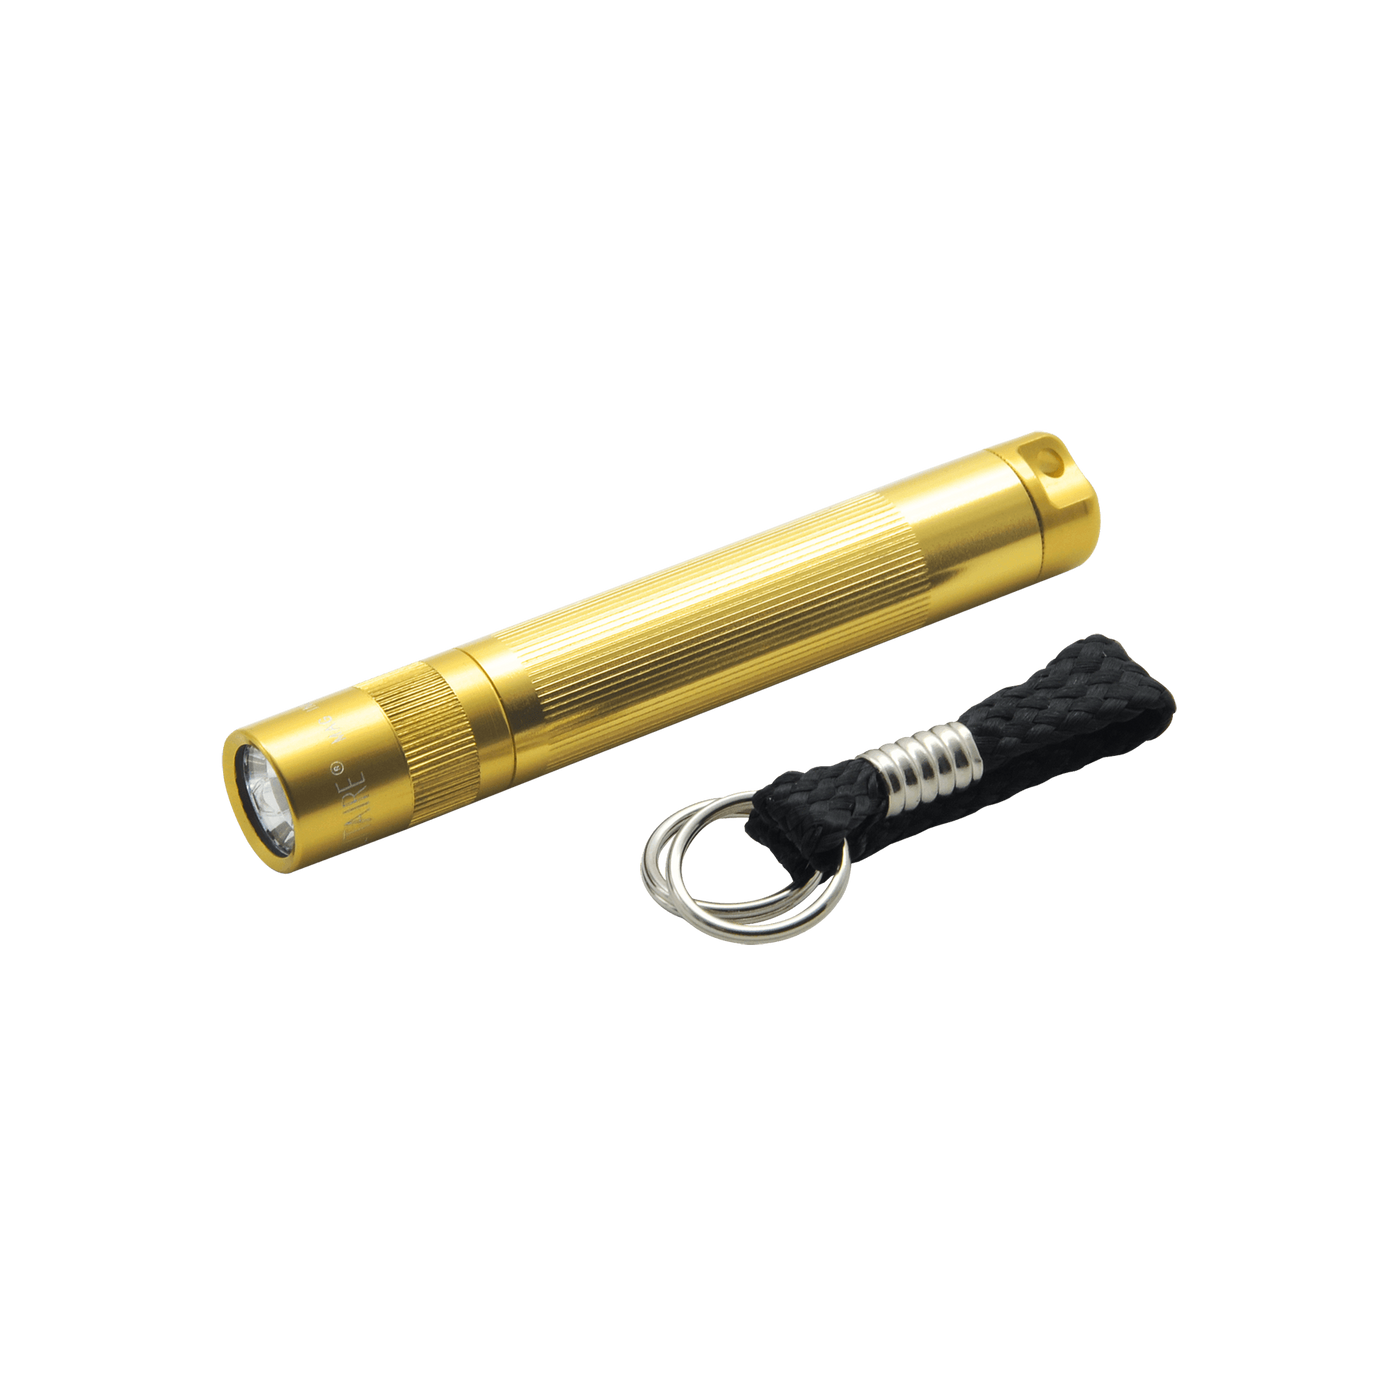 Maglite Solitaire LED Gold Keychain Flashlight